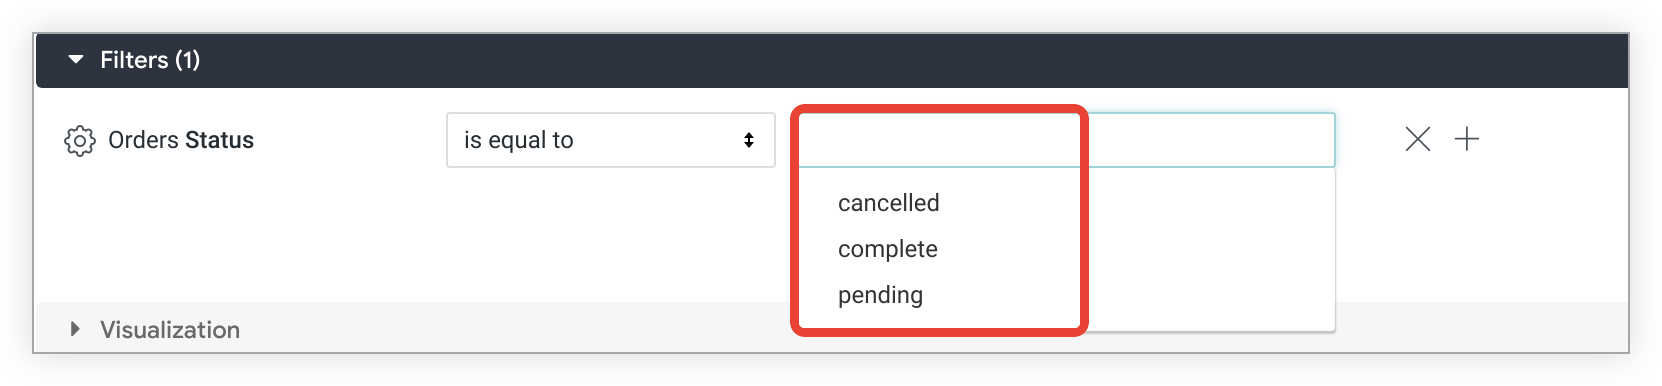 Filter suggestions appear in a drop-down menu that is revealed when a user selects the filter value field.